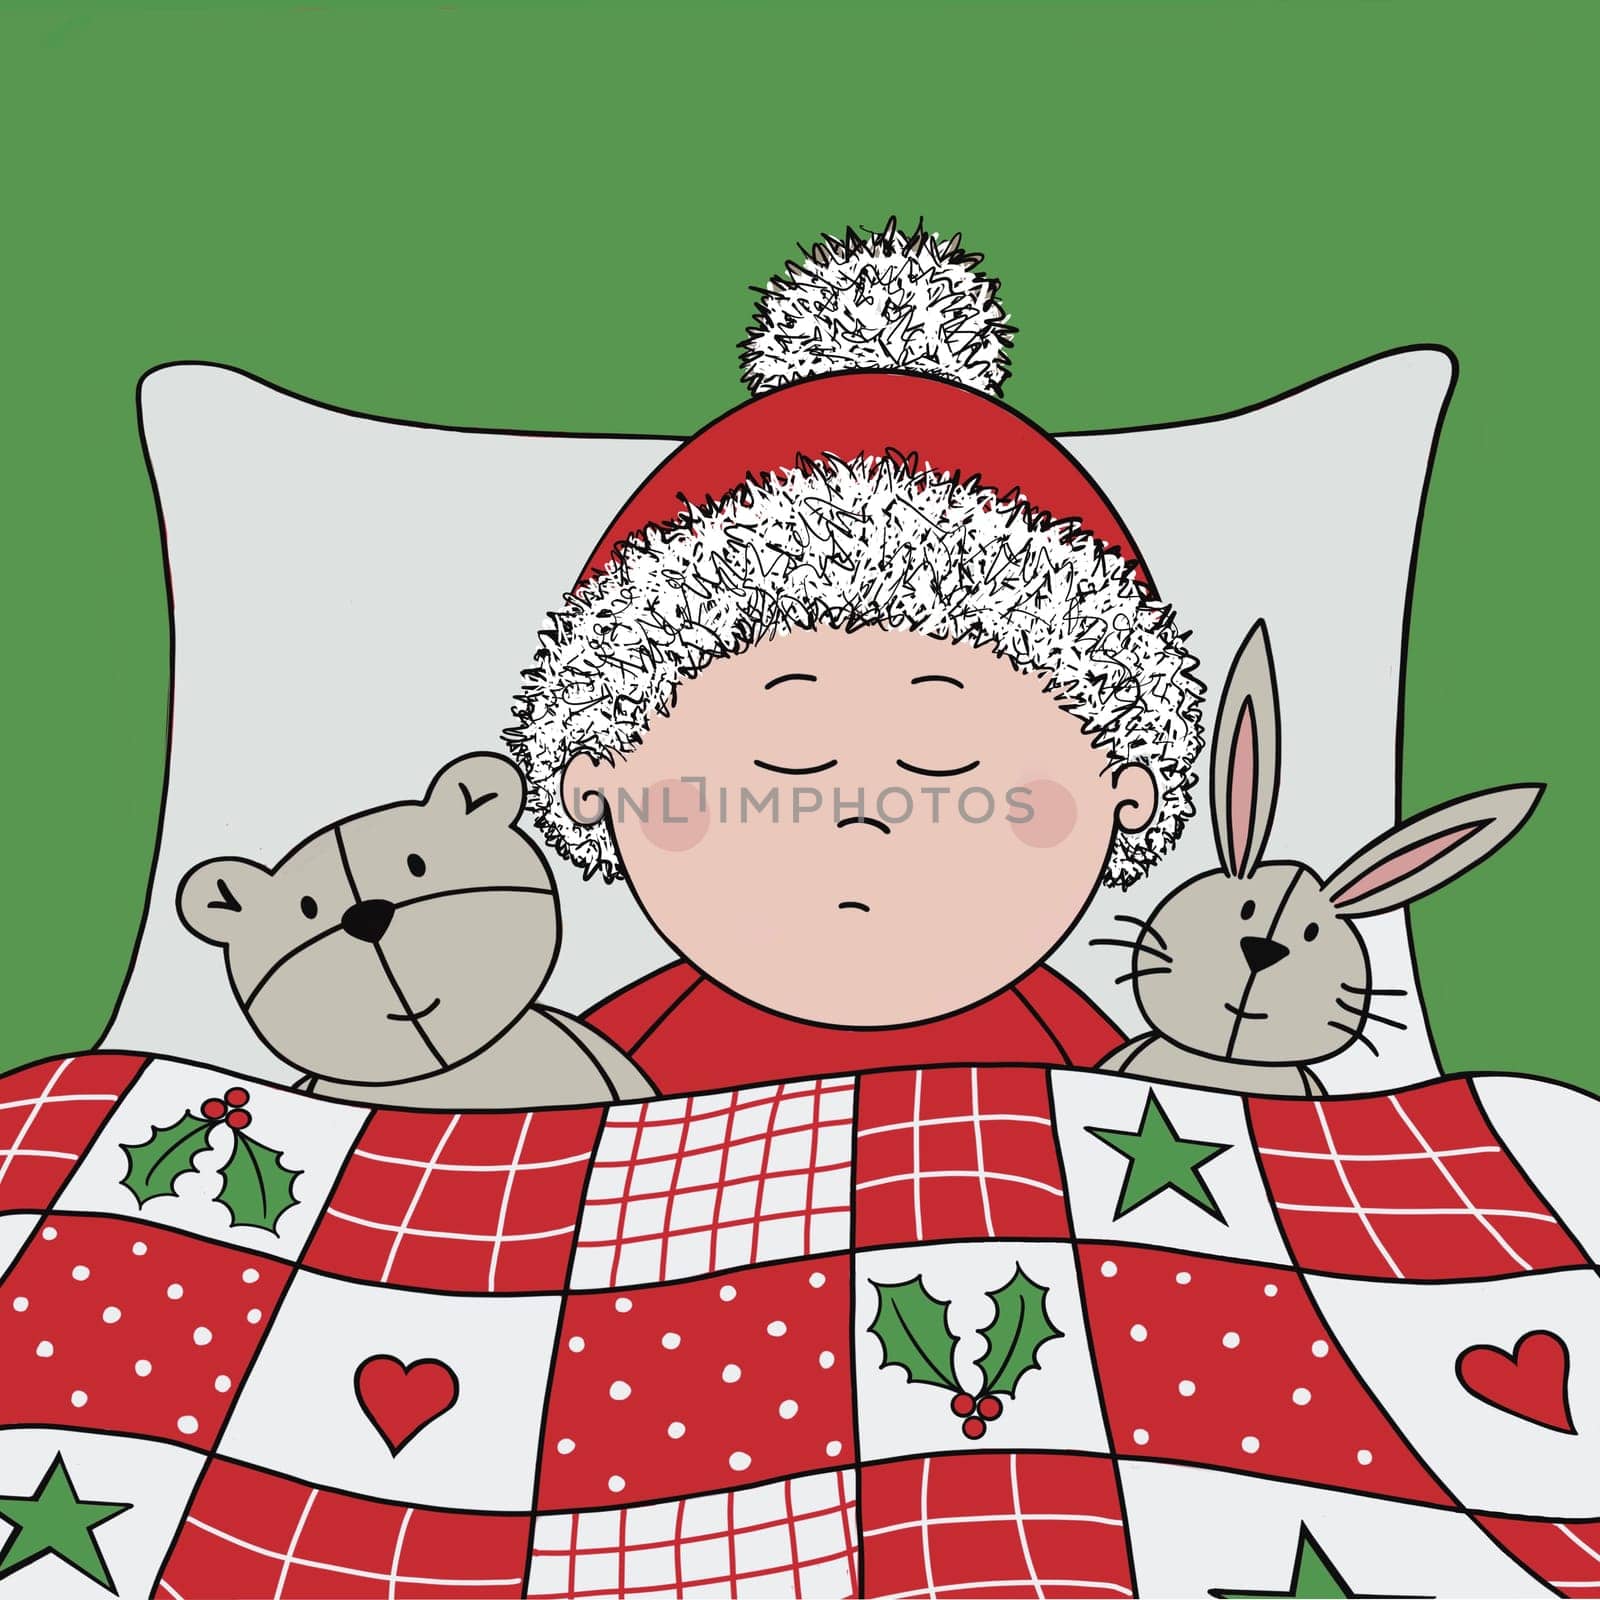 Baby’s first Christmas illustration. The Baby is sleeping under a cute Christmas patchwork quilt with holly leaves, heart and star motifs. They are wearing a Santa hat with fur trim and snuggled up with their favourite teddy bear and bunny rabbit toys. New baby at Christmas., a modern festive design.